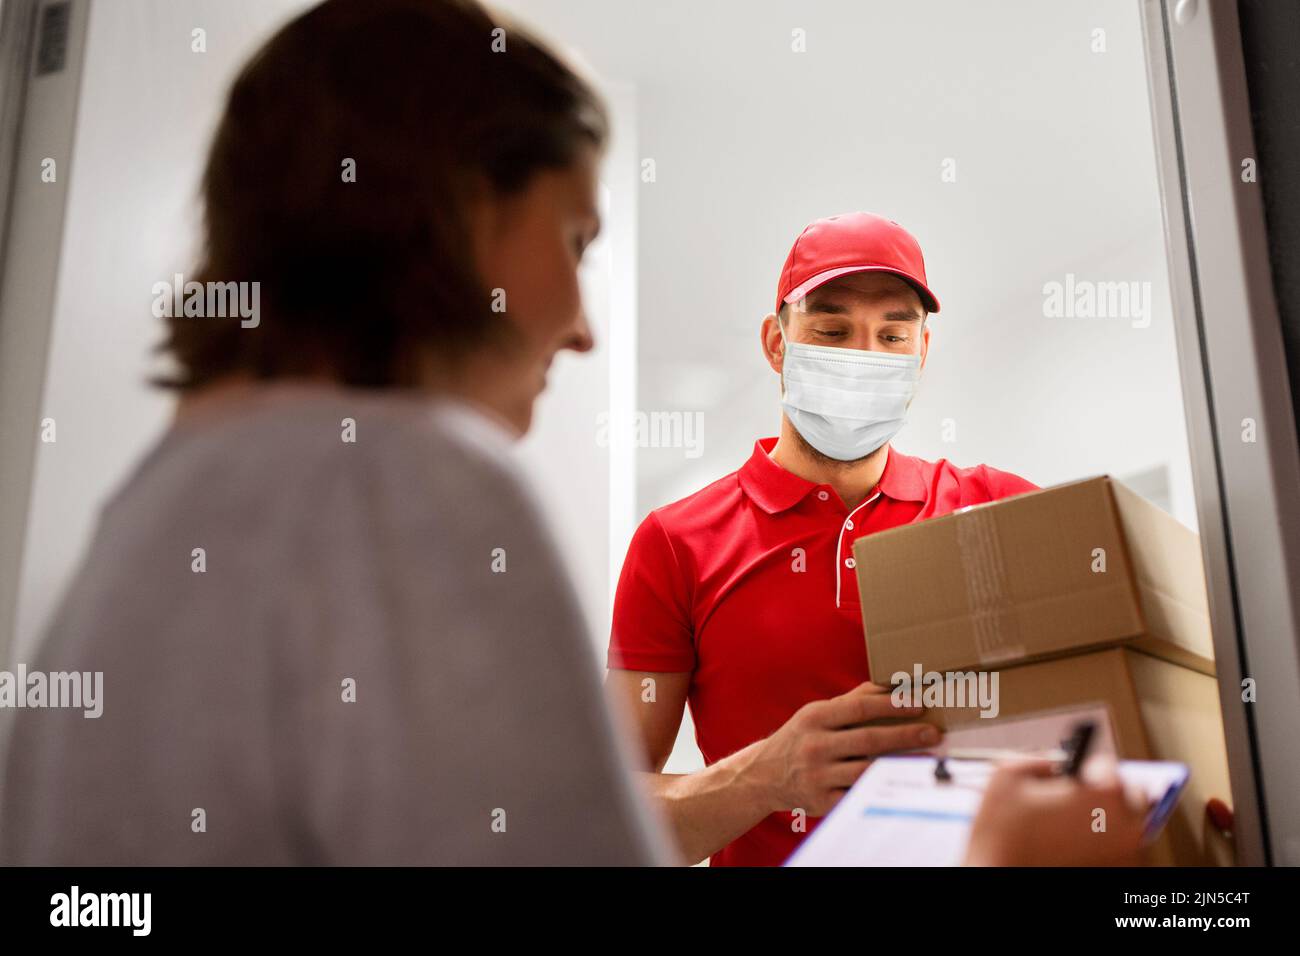 delivery man in mask with parcel and customer Stock Photo